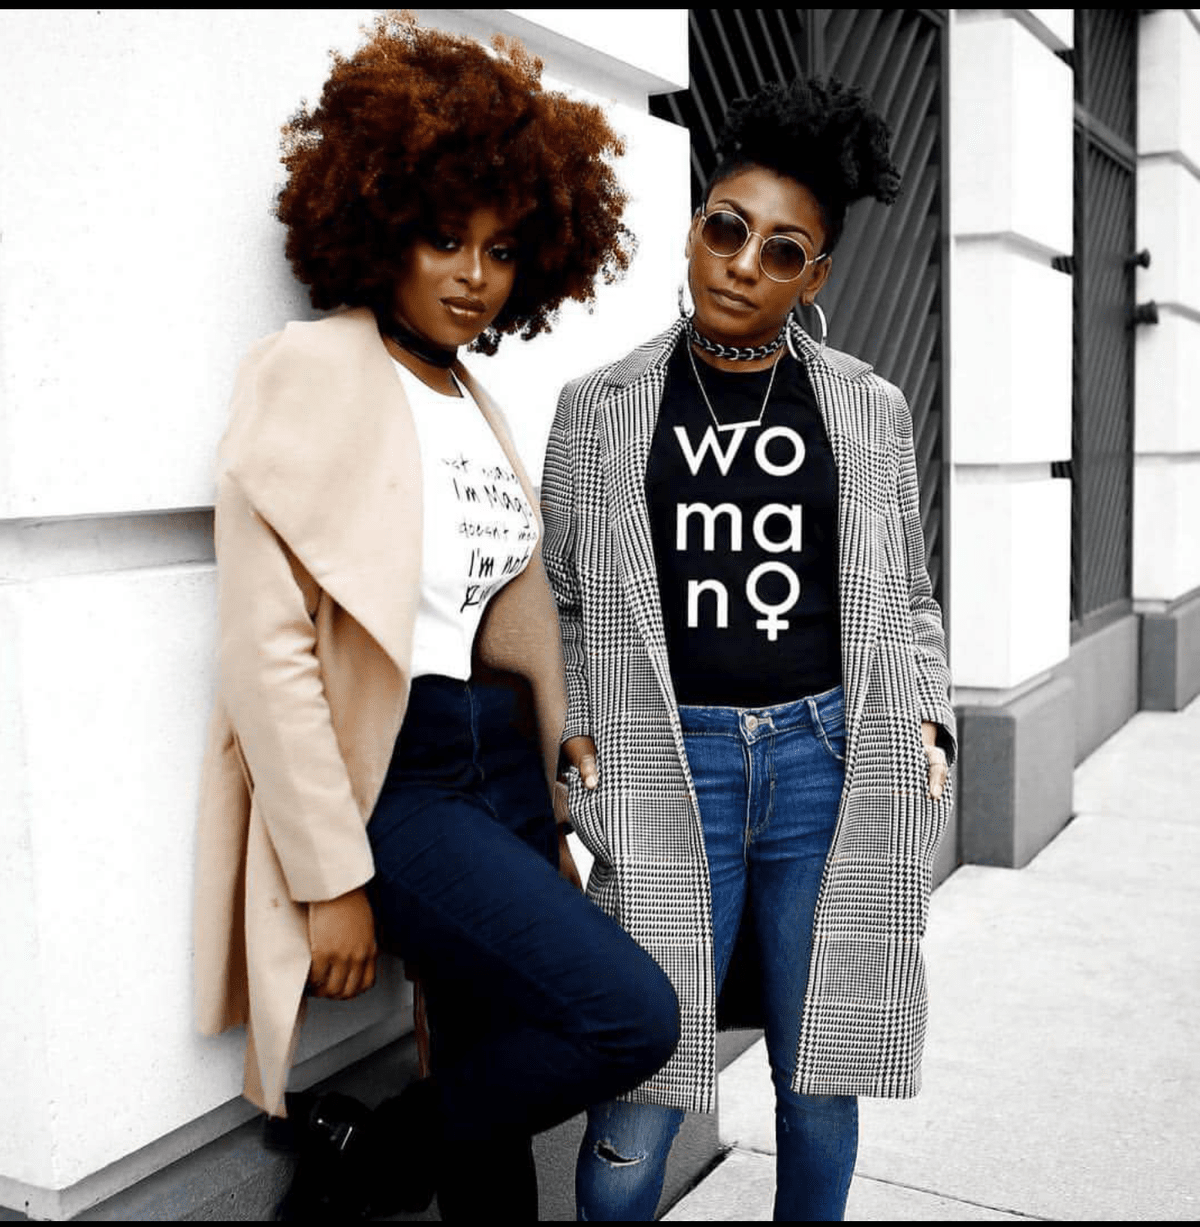 Two black women wearing jeans, jackets, and graphic tees